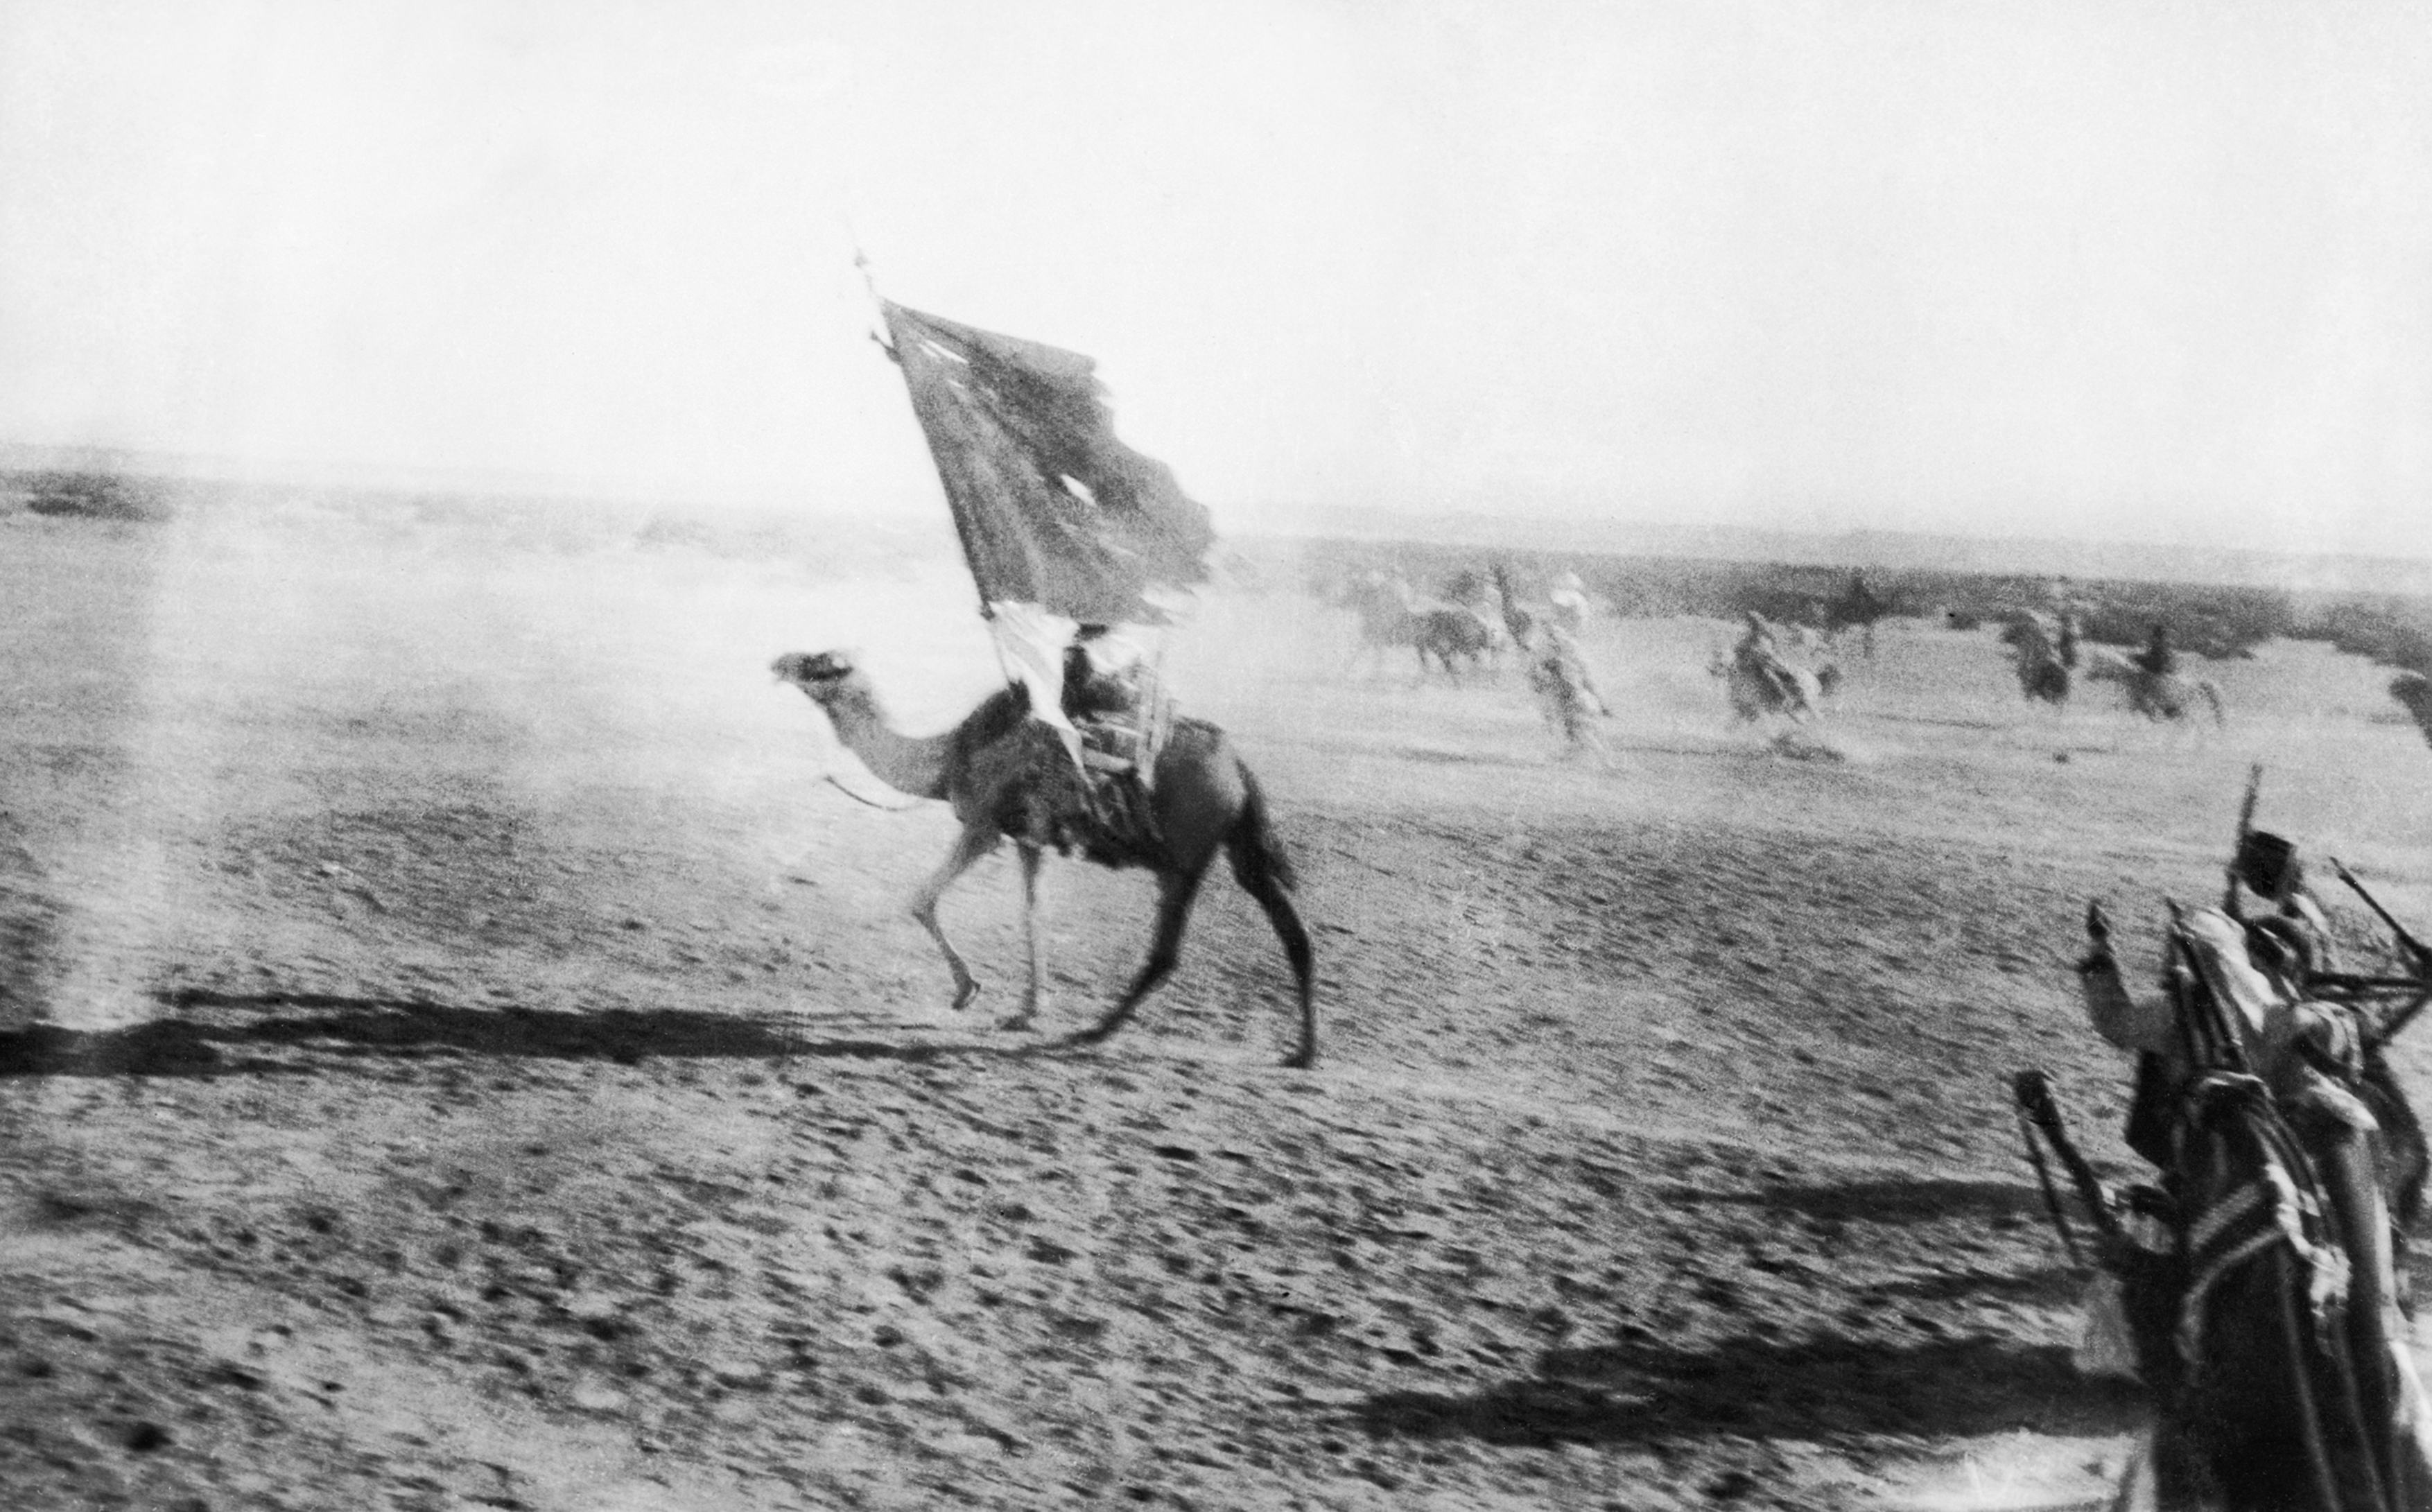 The flag of the Arab Revolt in 1916 and how it inspired modern